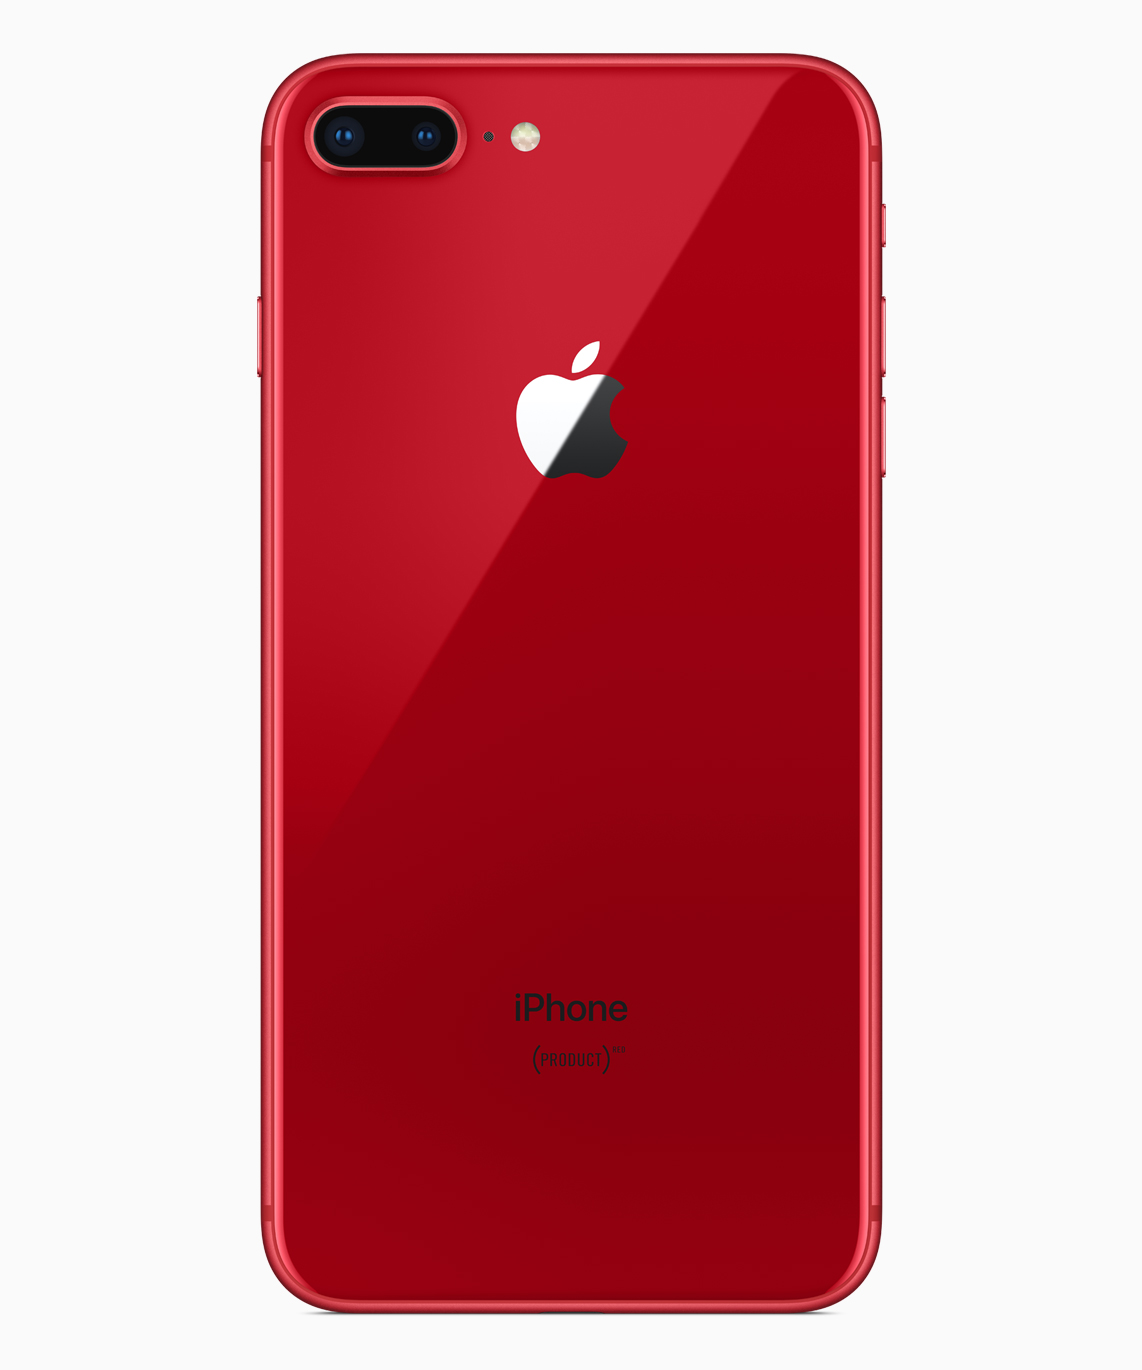 Apple Announces Special Edition (PRODUCT)RED iPhone 8 and iPhone 8 Plus